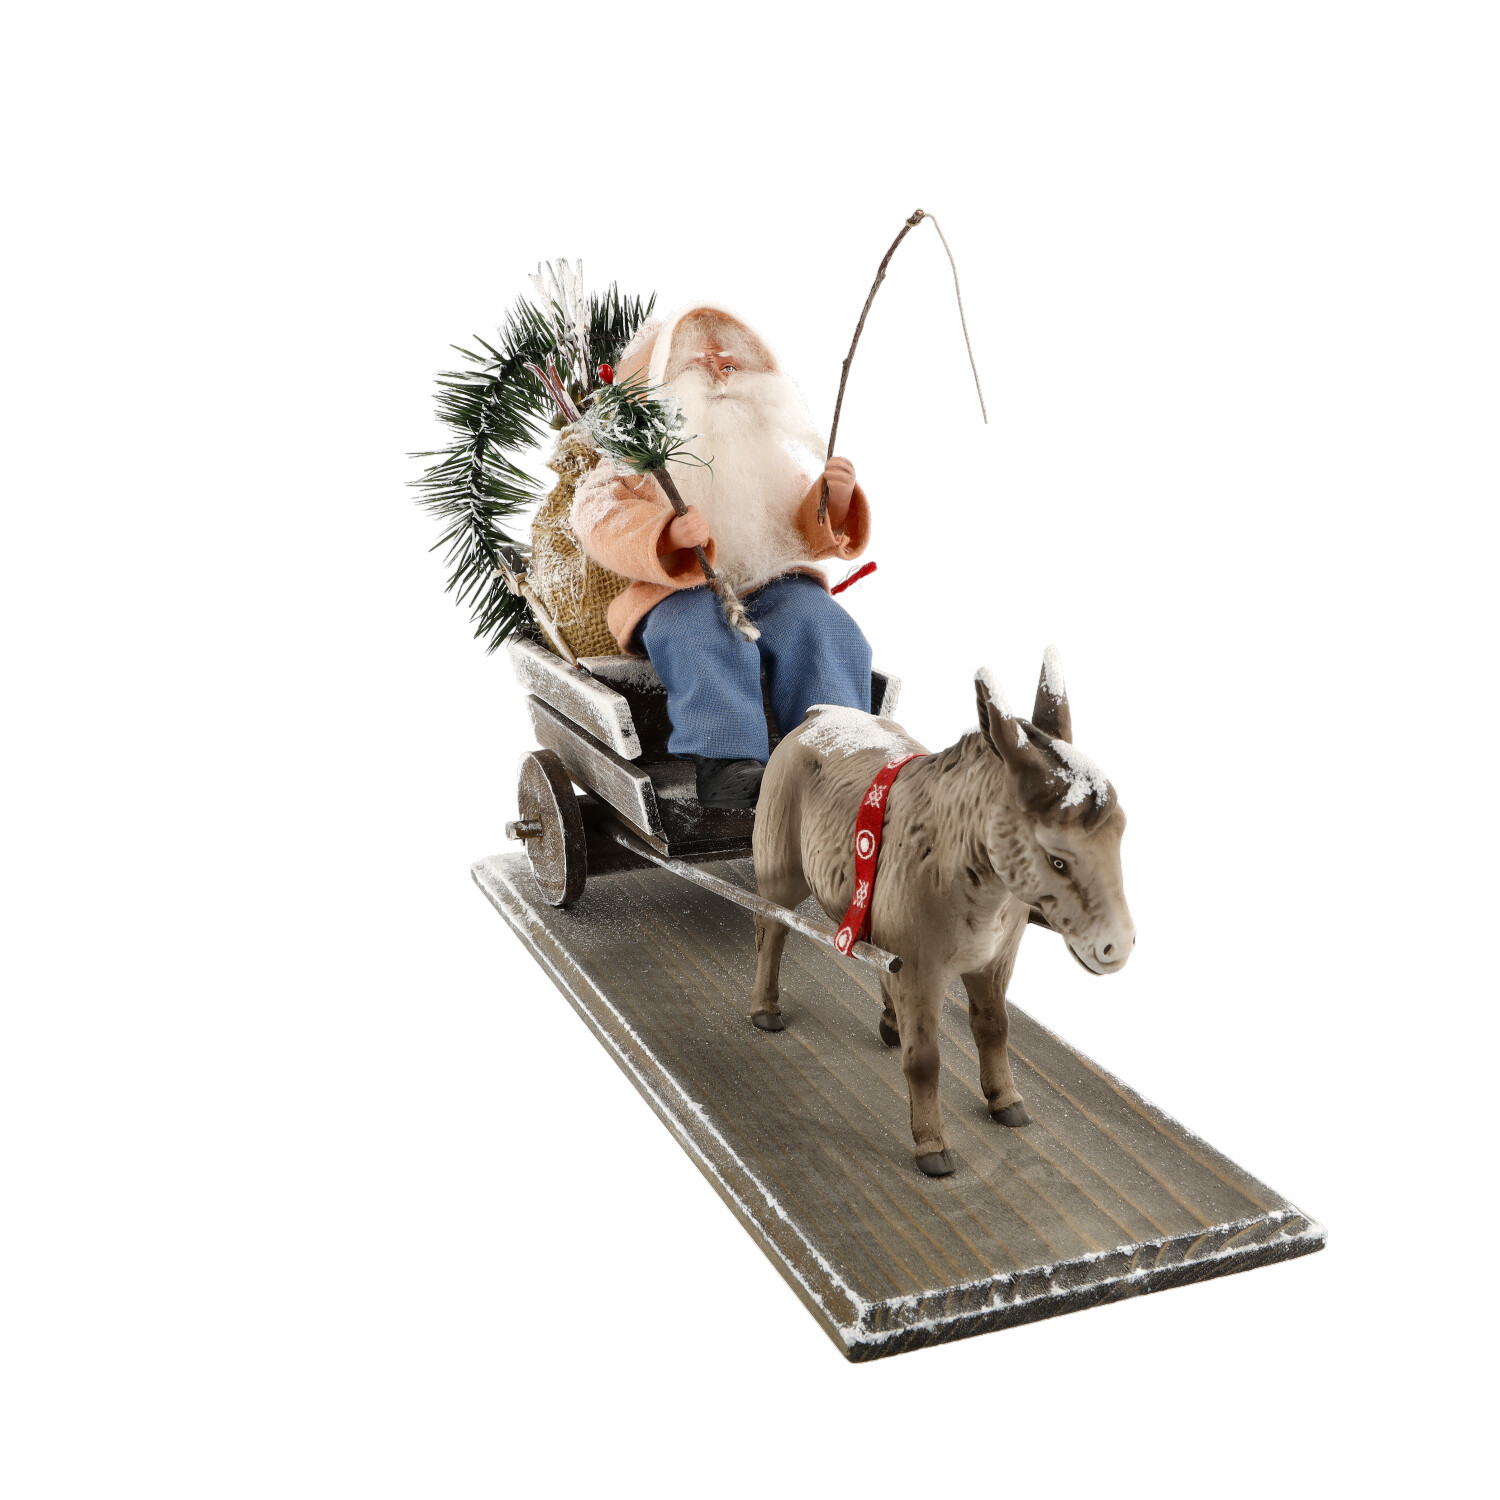 Christmas cart with donkey - Marolin Christmas decoration - made in Germany